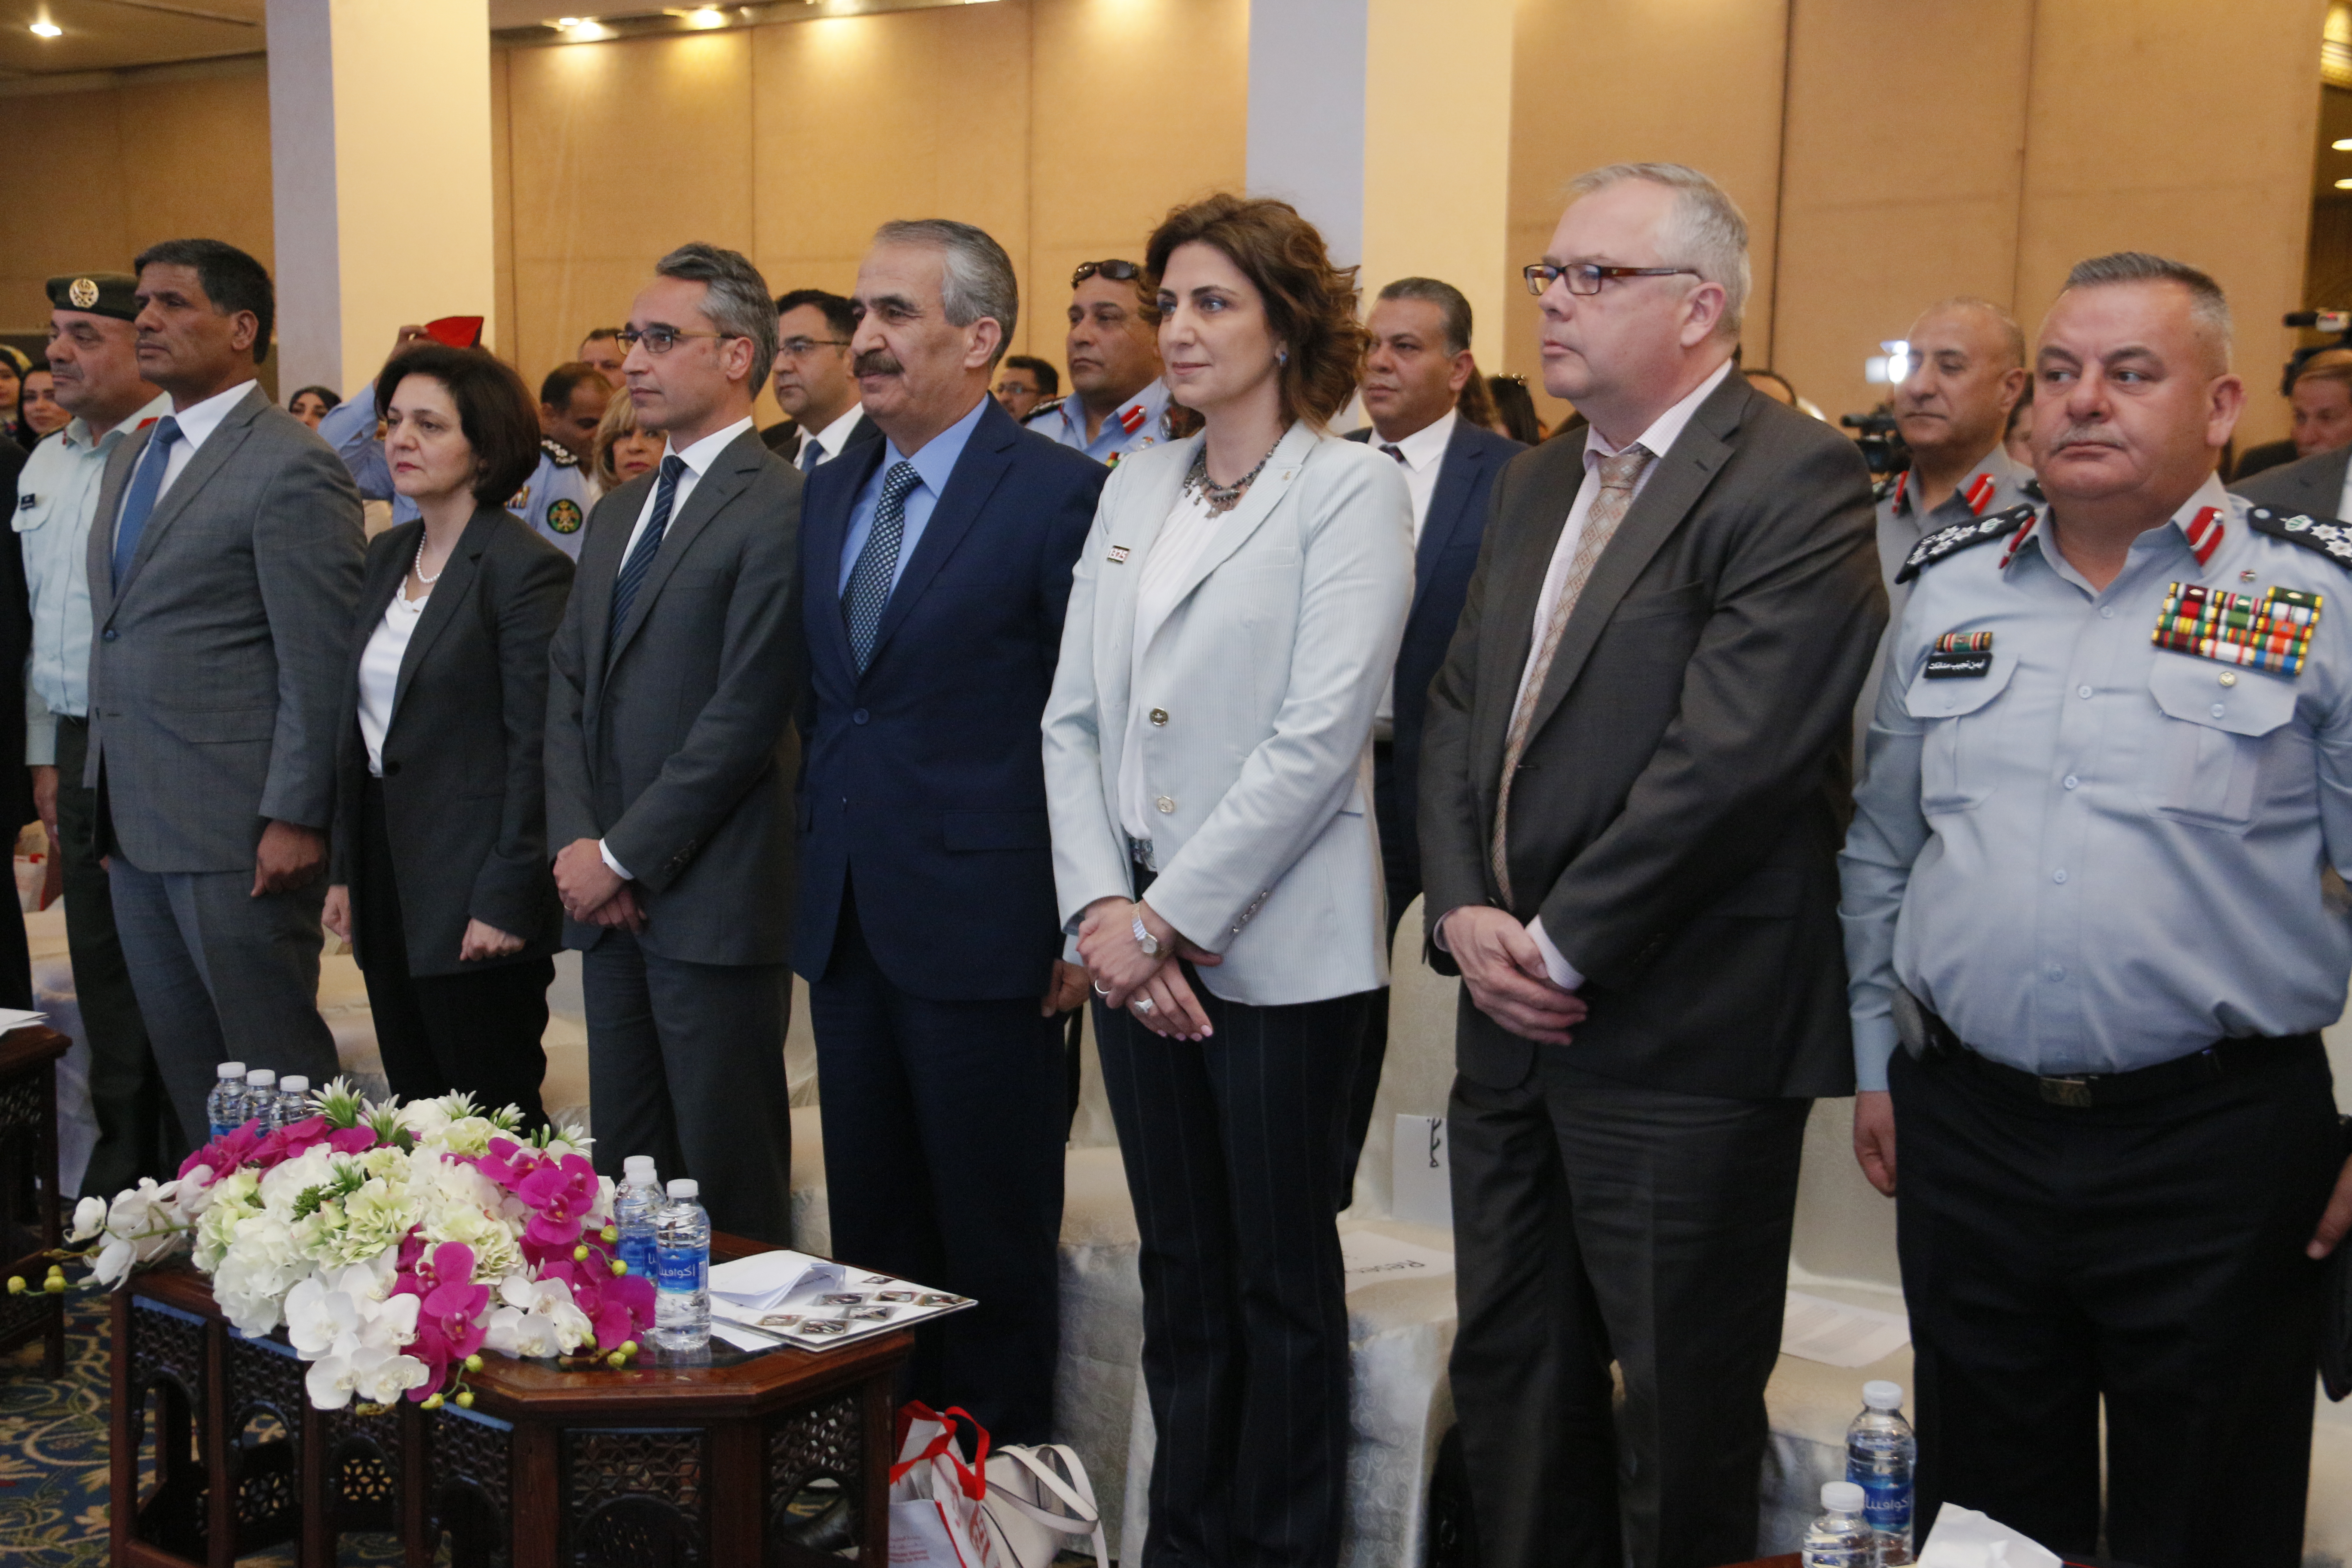 The launch was comprised of official representatives who provided speeches throughout the event including; Representative to the Chairman of the Joint Chief of Staff, Jordanian Armed Forces, Arab Army, L.T. General Mahmoud Freihat; Minister of Social Development, H.E Mrs. Hala Latouf; UN Women Jordan, Country Representative, Mr. Ziad Sheikh; The Minister of Interior Jordan, H.E Mr. Samir Mubaidin; Secretary General of the Jordanian National Committee for Women, Dr. Salma Al-Nims; The Ambassador of the Republic of Finland to Lebanon and Jordan, H.E Mr. Matti Lassila and Director of the Syrian Refugees' Affairs Department, Mr. Ahmad Kfaween.